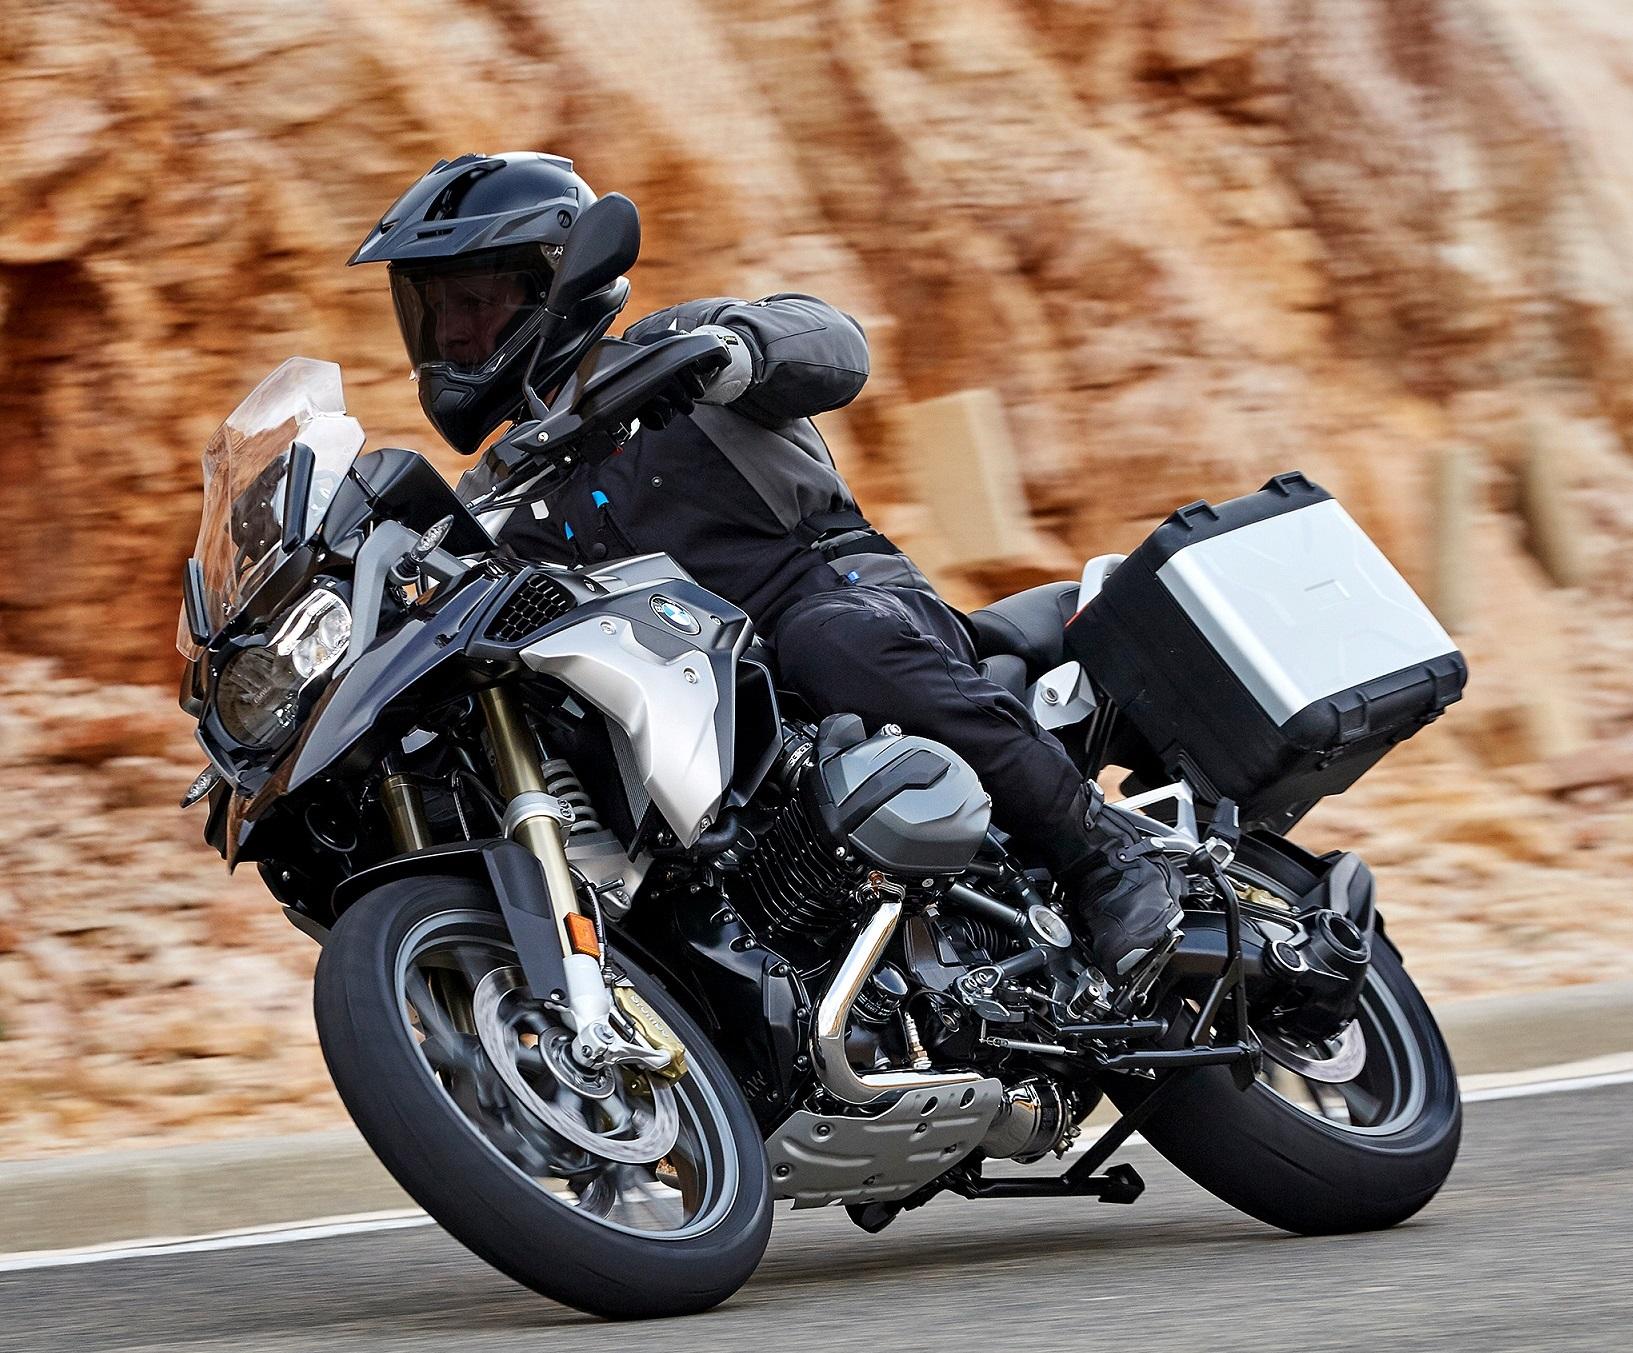 Bmw Motorrad Bmw Motorrad India Reduces Price Of Its Products By 10 Auto News Et Auto